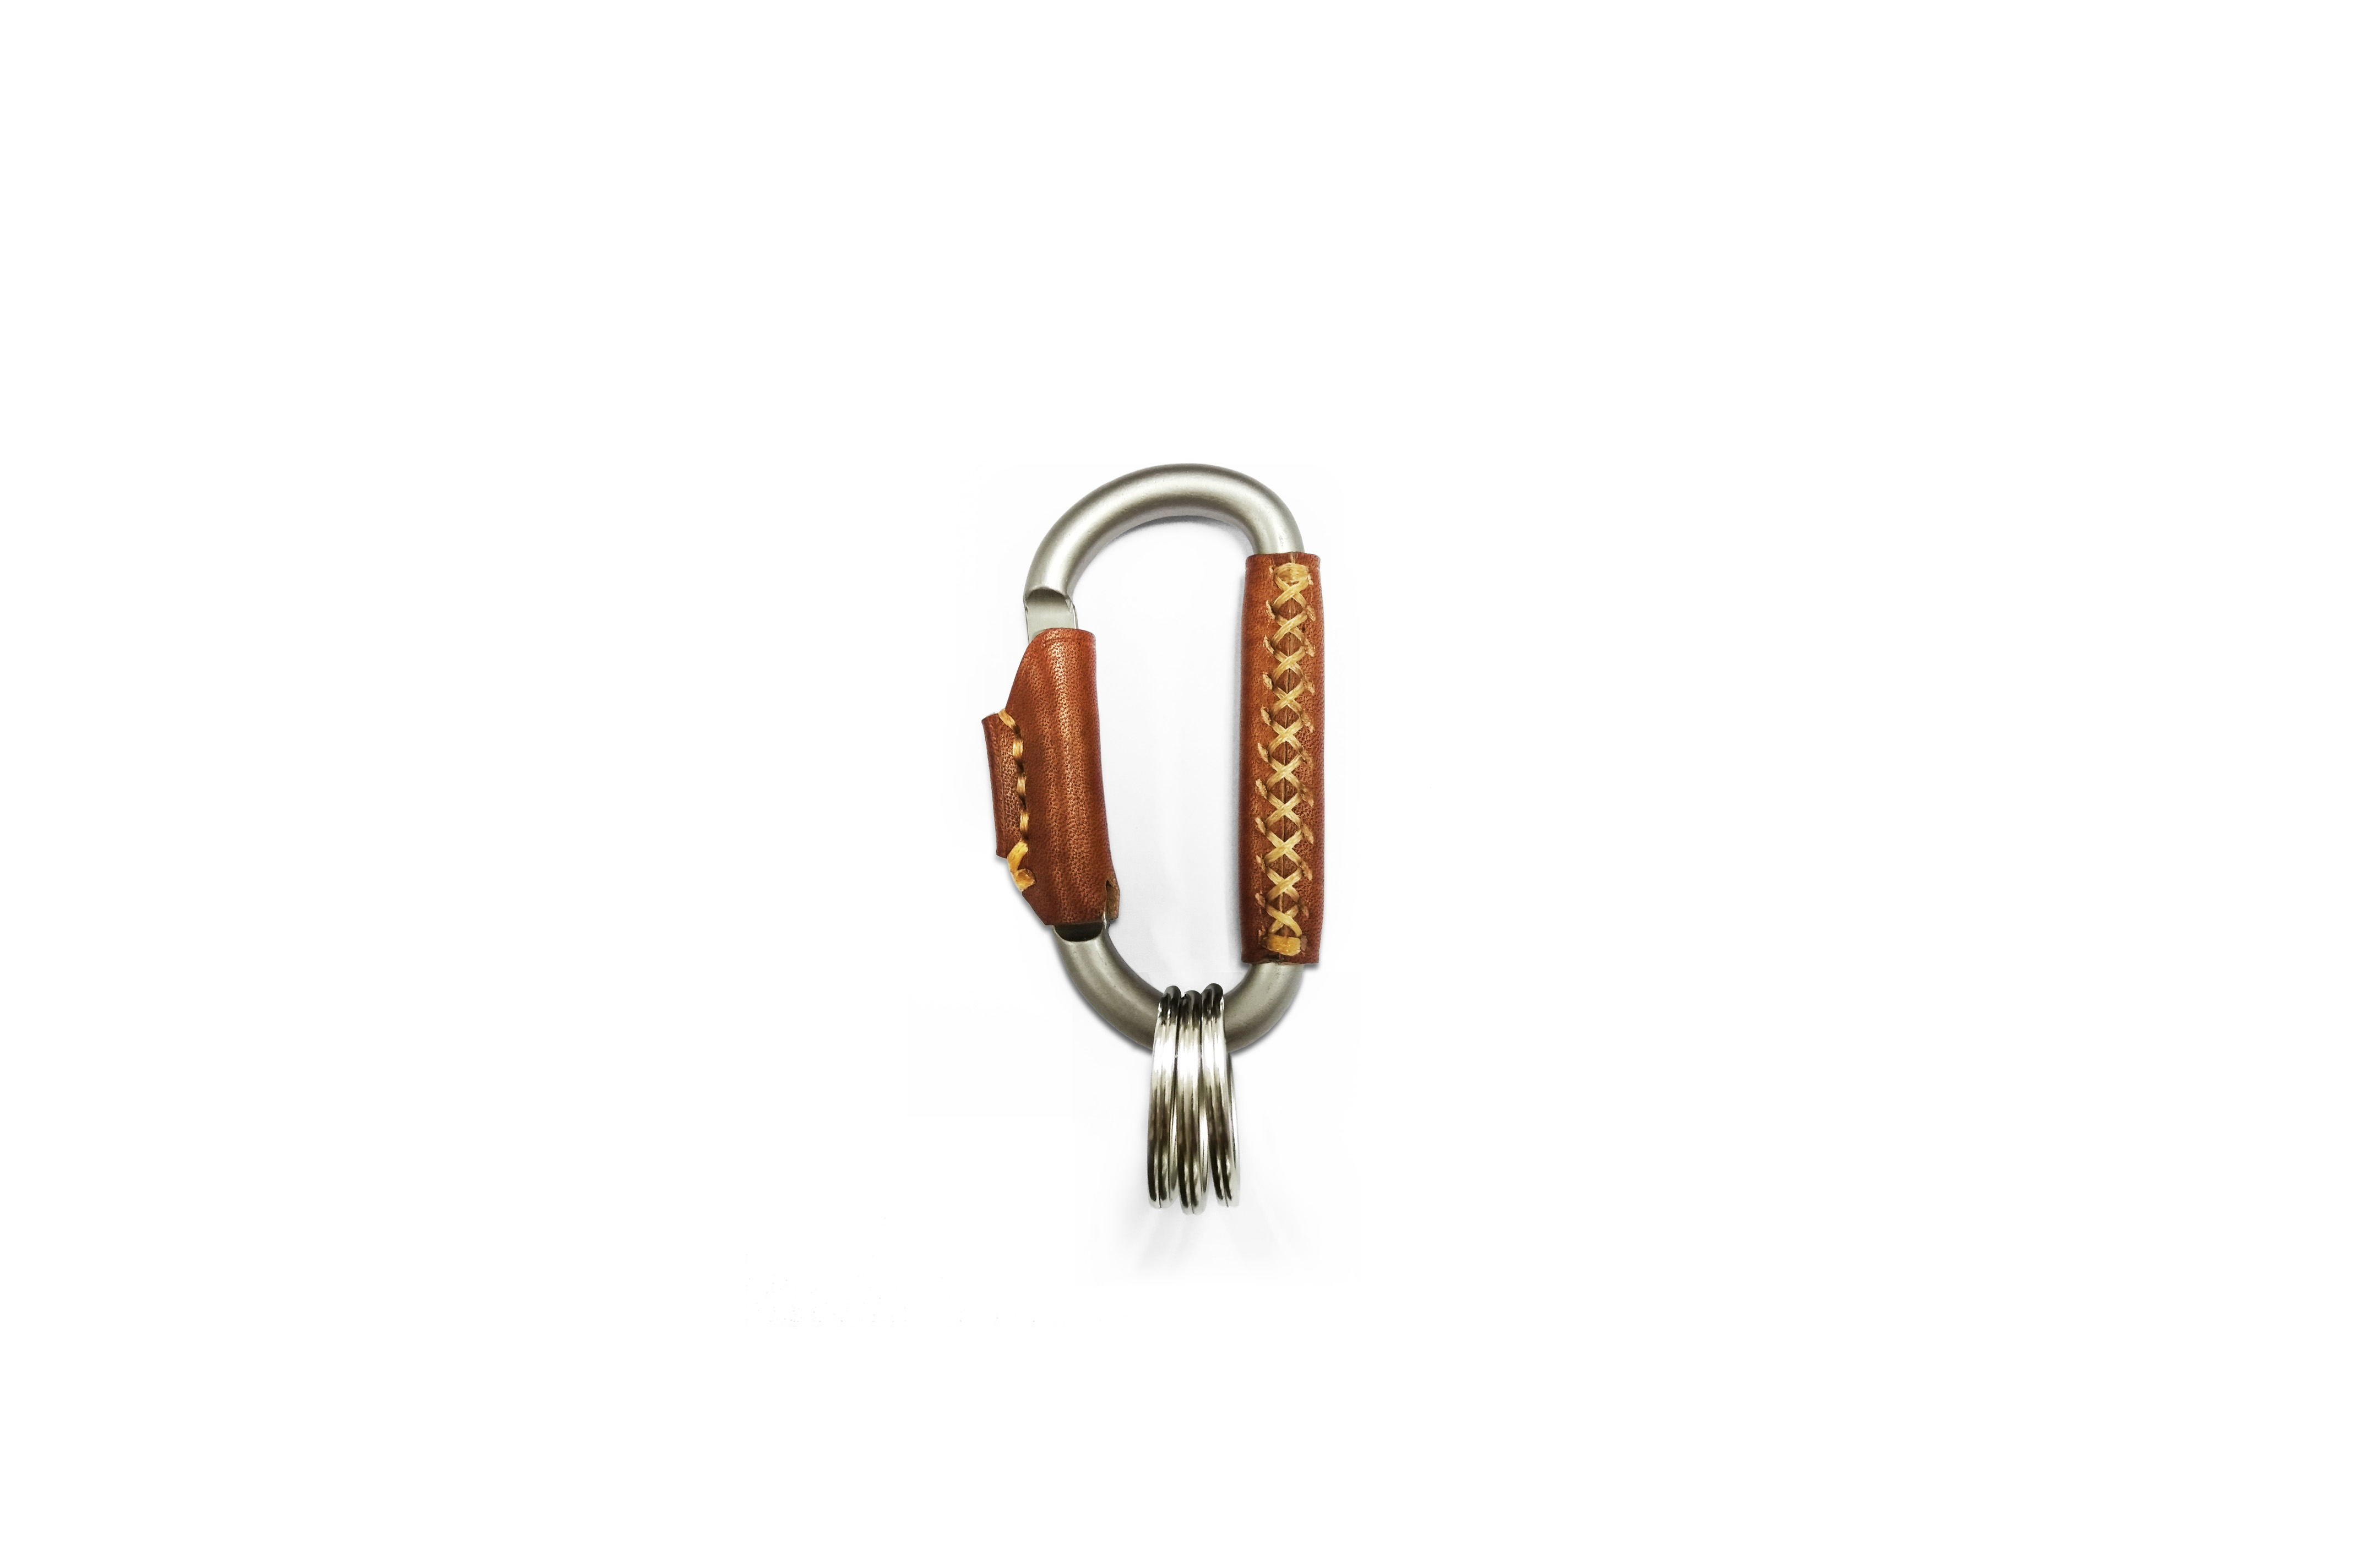 MICO Carabiner leather wrapped Key holder, key chain, k